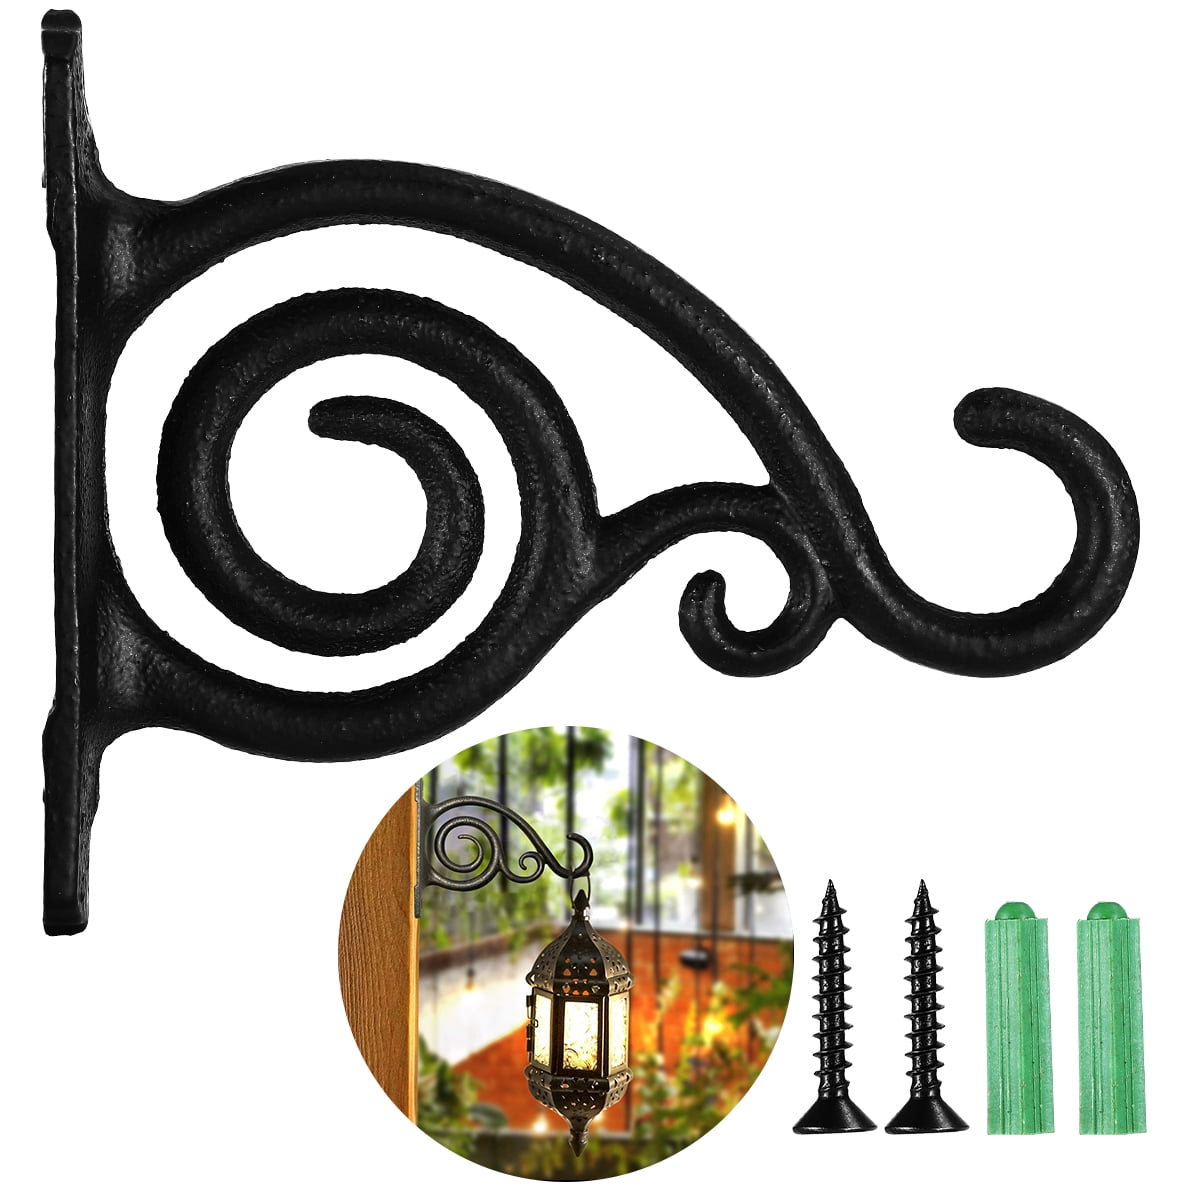 Details about   Wrought Iron Hooks Hangers Hanging Wall Bracket For Lantern Planter Home Hook Up 